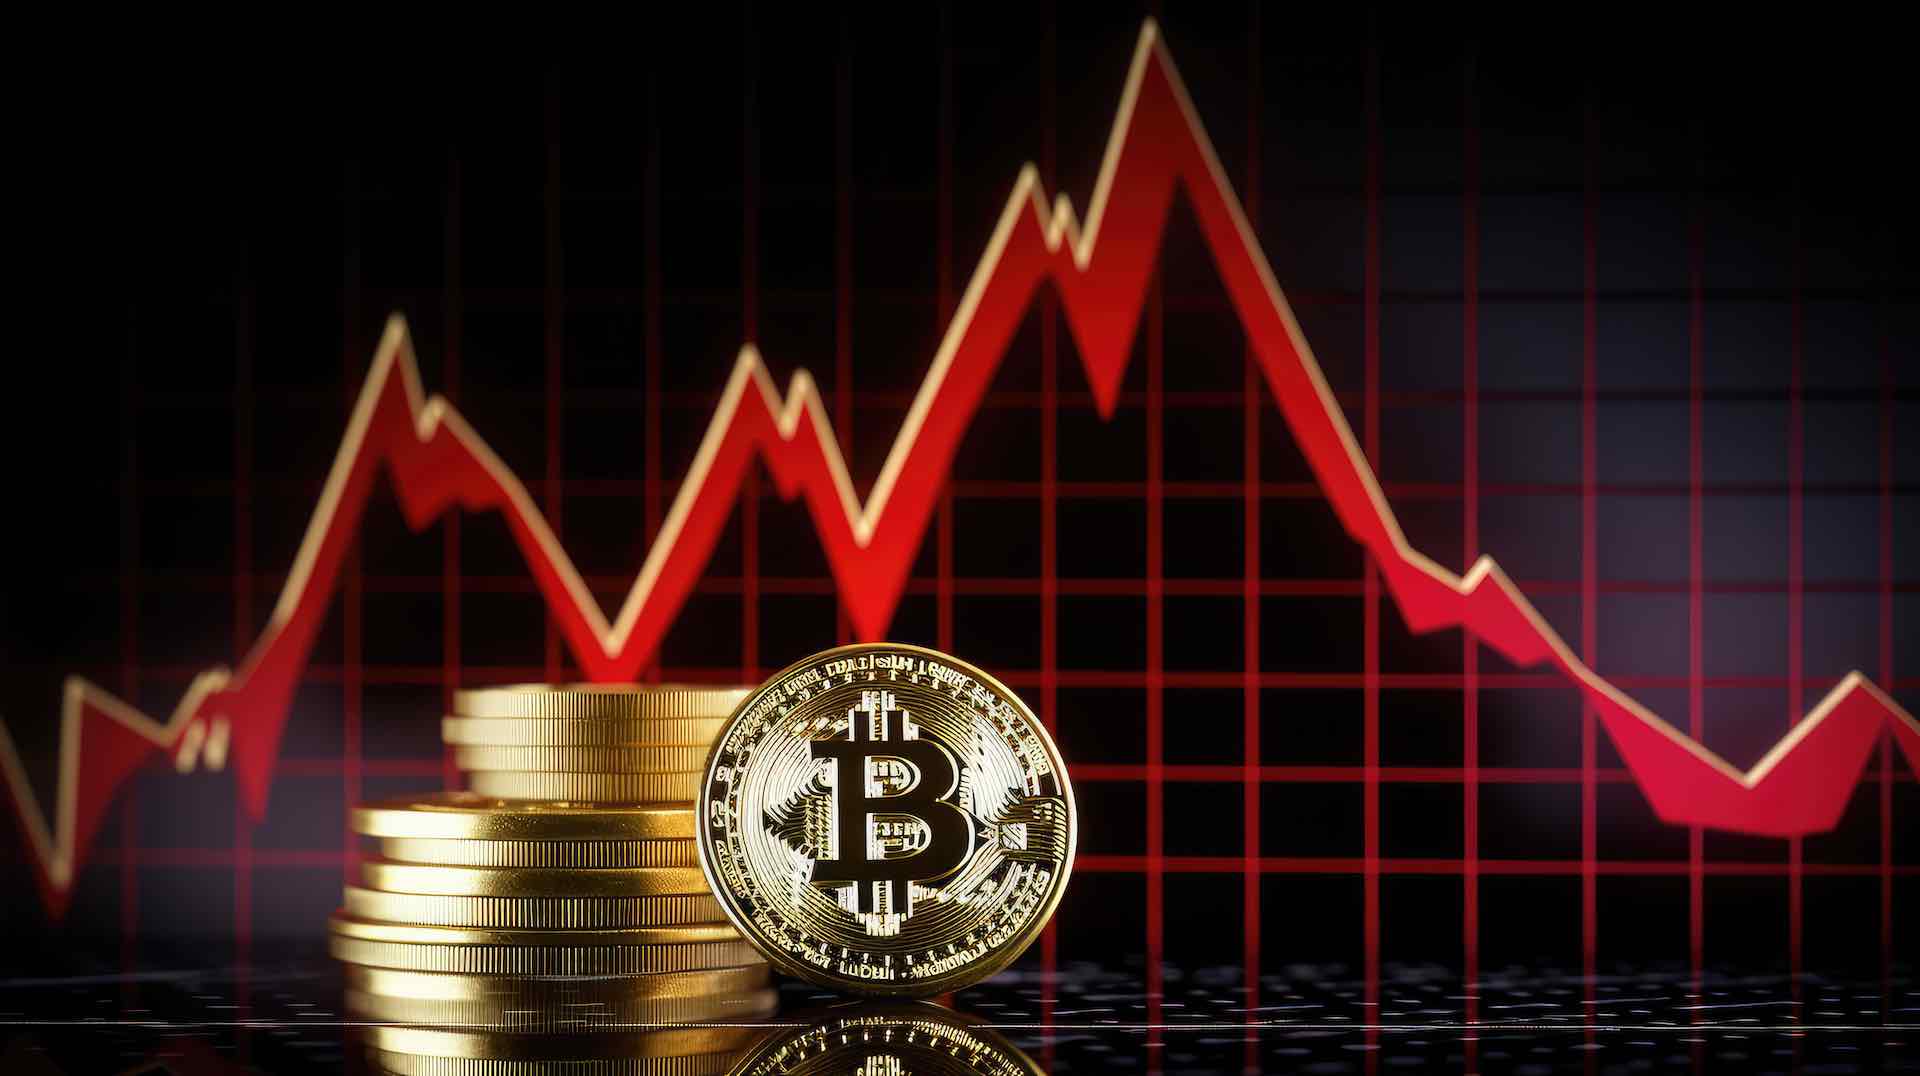 Bitcoin experienced a significant drop of ,000 within a span of 24 hours, as interest rates surged, marking the second consecutive day of decline for the cryptocurrency at the outset of the new month and quarter. This decline was influenced by the rising Treasury yields and the strengthening of the U.S. dollar. According to Coin Metrics, the flagship cryptocurrency plummeted by more than 6% on Tuesday, settling at ,150.00, thereby accumulating a two-day loss of approximately 7%. This decline commenced after a trading period where Bitcoin was valued at around ,000 on Monday morning. The dip was attributed to the release of data indicating growth in the manufacturing sector for the first time since September 2022 and a decrease in investor speculation regarding potential rate cuts in June. As a result, Bitcoin's value has retreated by about 11% from its all-time high recorded on March 14. Ether, another significant cryptocurrency, mirrored Bitcoin's decline by losing 6% of its value, reaching a trading price of $3,240.27. Simultaneously, the 10-year U.S. Treasury yield surged to its highest point of the year, while the U.S. dollar, which typically moves inversely to Bitcoin, reached its peak in almost five months. Analysts attributed Bitcoin's correction partly to the robust performance it exhibited in the first quarter. Joel Kruger, a market strategist at LMAX Group, stated, "Bitcoin doesn’t need much excuse to go through a period of correction after such an explosive performance in Q1." He further explained that the recent strength in U.S. economic data, coupled with persisting inflation concerns, led to a reevaluation of Federal Reserve expectations, resulting in increased demand for the U.S. dollar due to more attractive yield differentials. The drop in Bitcoin's value might have been exacerbated by a significant transfer of over 4,000 bitcoins to the Bitfinex exchange by a large holder, commonly referred to as a "whale." Data from CryptoQuant highlighted a surge in the exchange's reserves, typically indicating heightened selling activity, coinciding with the sudden decline in Bitcoin's price late Monday night. This decline also had a ripple effect on stocks linked to the performance of Bitcoin. Notably, cryptocurrency exchange Coinbase saw a 4% decrease, while software provider MicroStrategy, which closely correlates with Bitcoin's price movements, experienced a nearly 7% drop. Mining-related stocks such as Marathon Digital and Riot Platforms witnessed losses of 7% and 6%, respectively, while CleanSpark, a prominent miner in 2024, slid by 6%. Looking ahead, April could prove to be a tumultuous period for cryptocurrencies and associated stocks, particularly mining companies. Investors are keeping a close eye on the upcoming Bitcoin halving event, slated for the second half of the month. This event is expected to reduce miner rewards and subsequently impact their revenue. Moreover, while the recent dip in Bitcoin's value may raise concerns among investors, it's essential to consider the broader trajectory of its performance. Despite the recent market turbulence, Bitcoin has maintained a positive trajectory throughout the year. As of now, Bitcoin has recorded a notable 53% increase in value since the beginning of 2024, signaling continued interest and confidence in the cryptocurrency among investors and market participants alike. Bitcoin's ability to weather fluctuations and demonstrate consistent growth reflects its enduring relevance and appeal to investors seeking exposure to alternative assets.